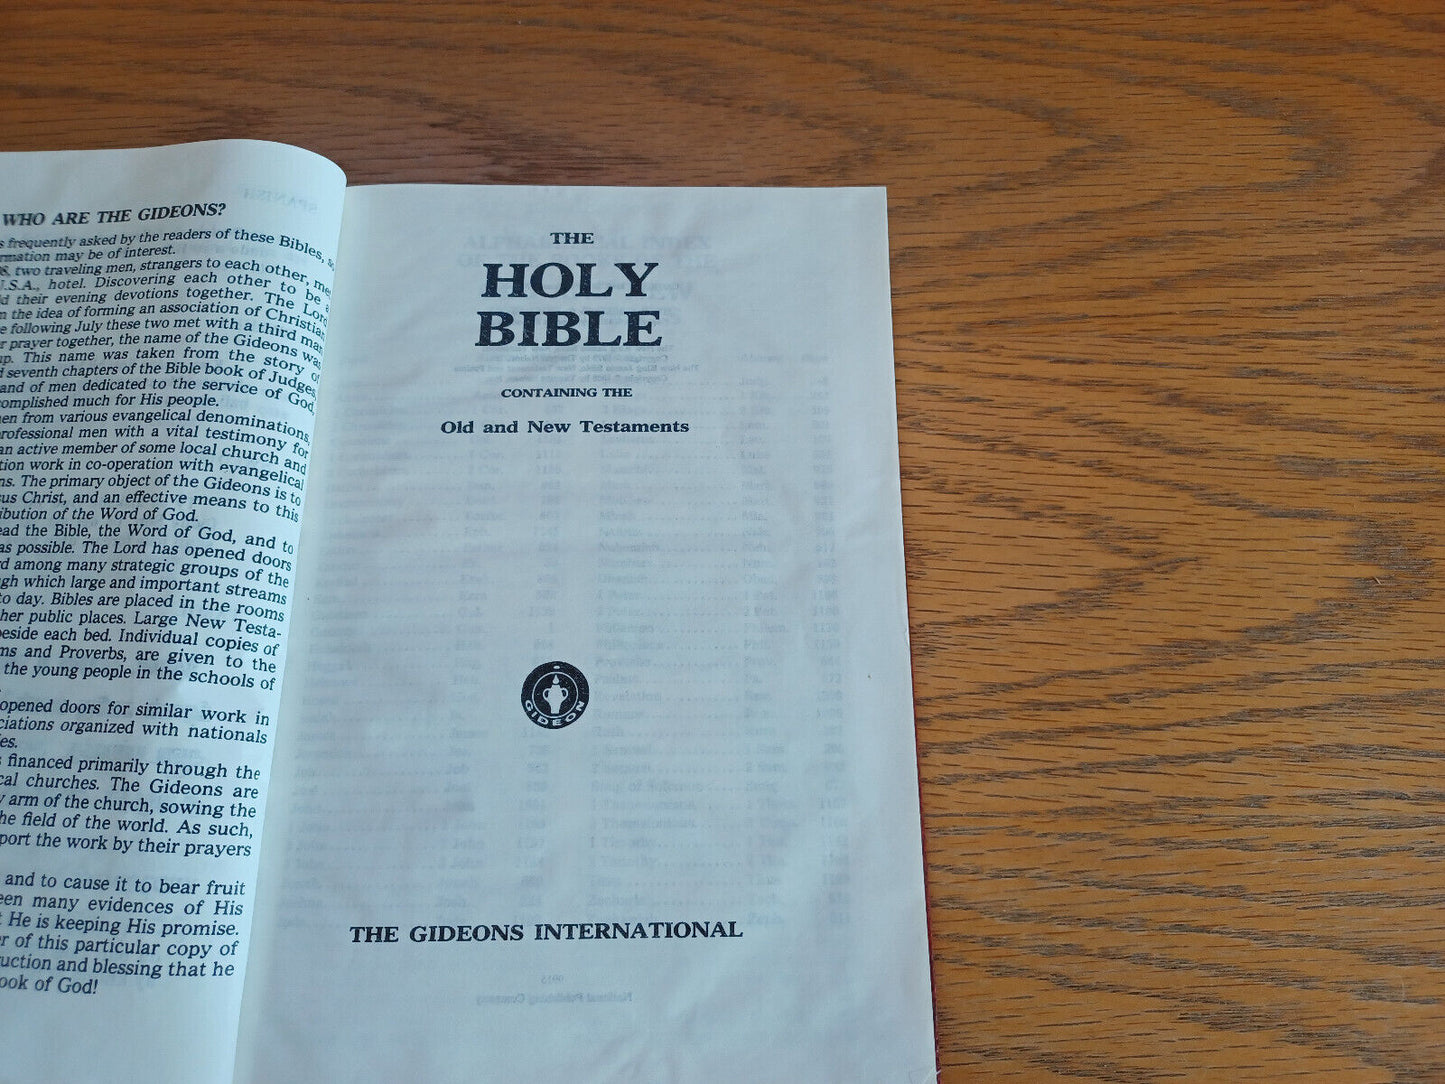 Holy Bible 1985 Gideons International Hardcover Old and New Testaments